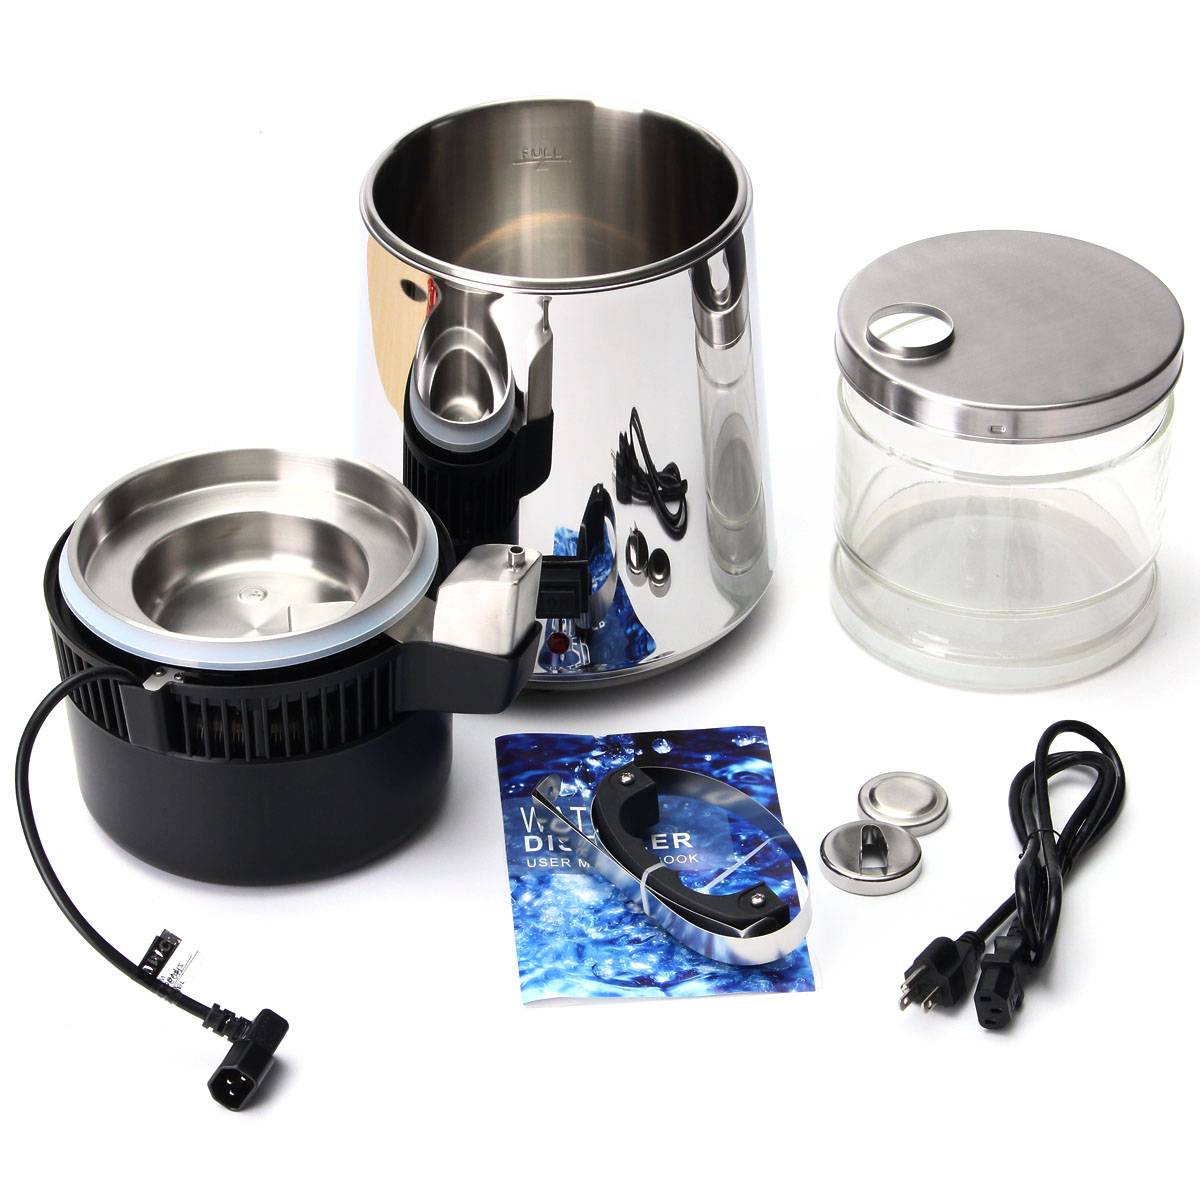 110V-4L-Pure-Water-Distiller-750W-Stainless-Steel-Purifier-Filter-Machine-w-Glass-Container-1283427-2